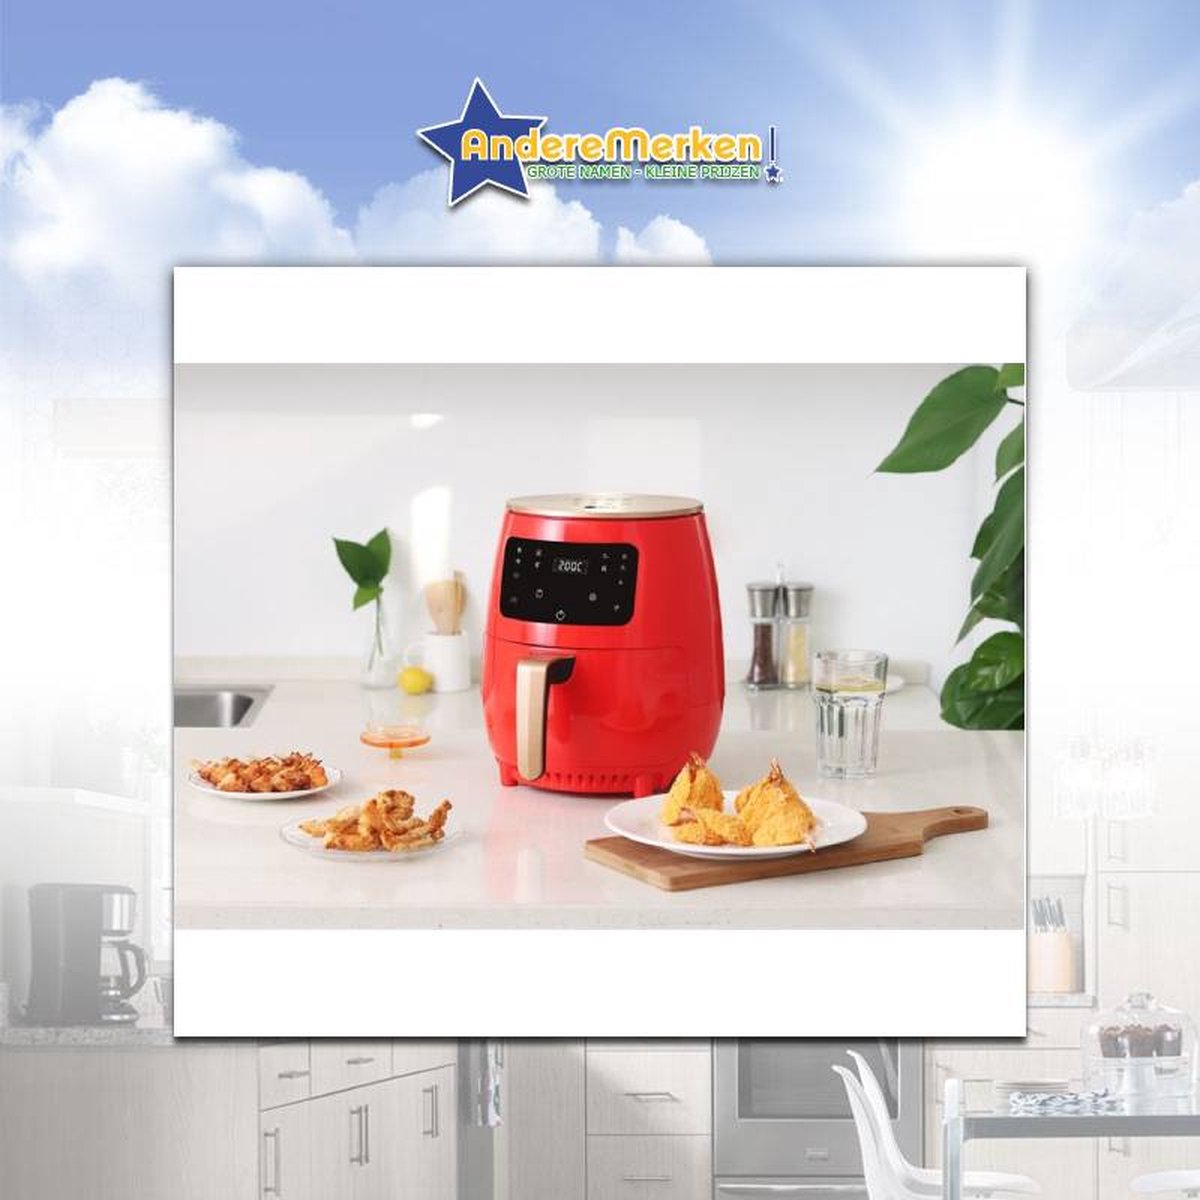 Stella Pro+ - Friteuse à air chaud Airfryer - Airfryer 2 litres - 2 litres  Airfryer 